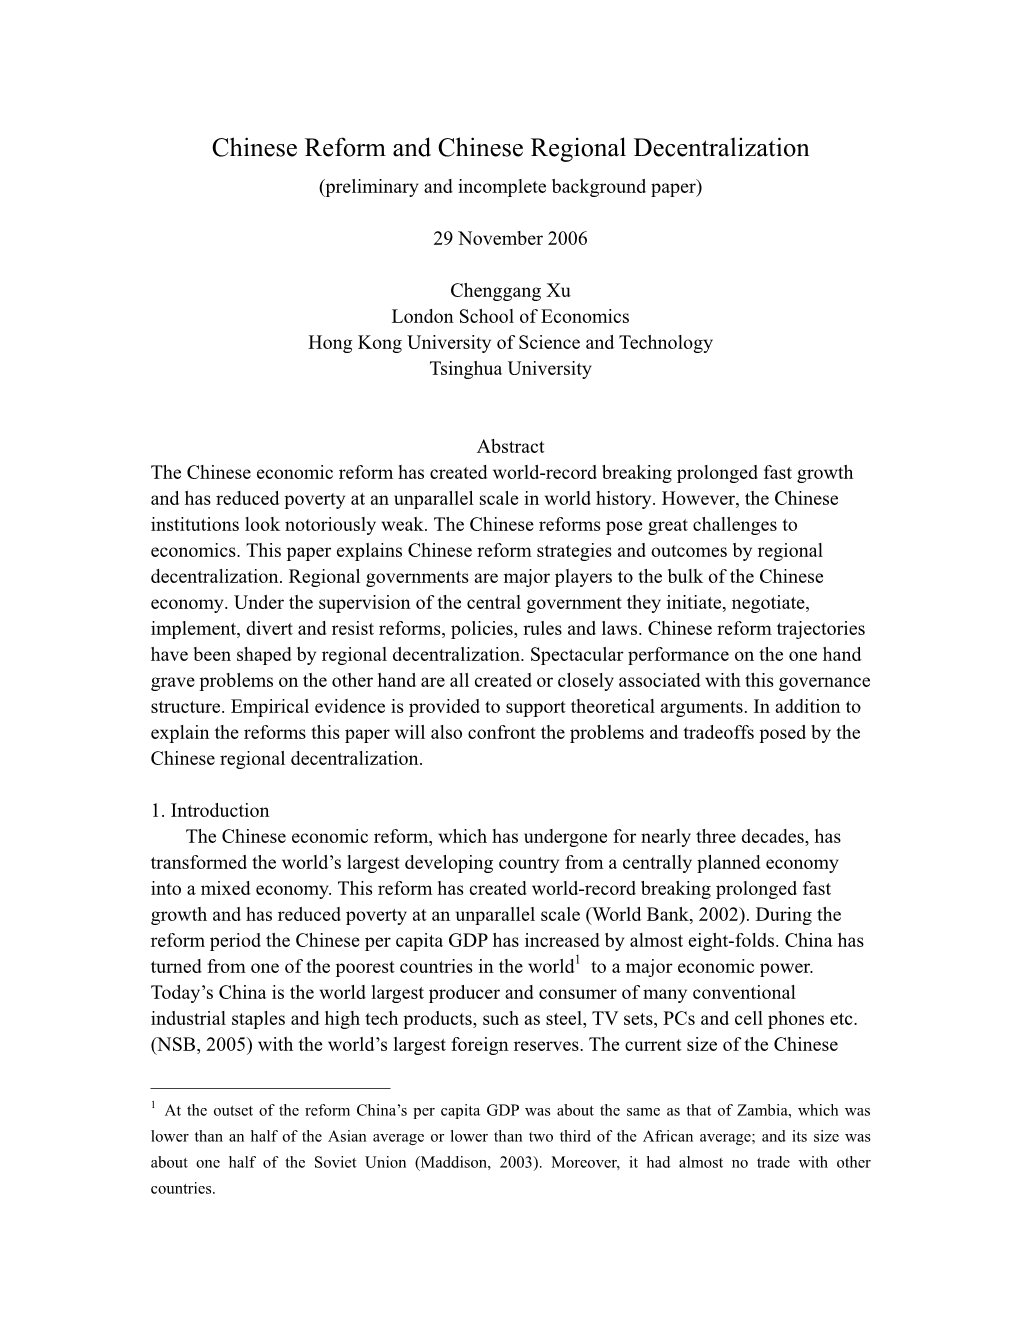 Chinese Reform and Chinese Regional Decentralization (Preliminary and Incomplete Background Paper)